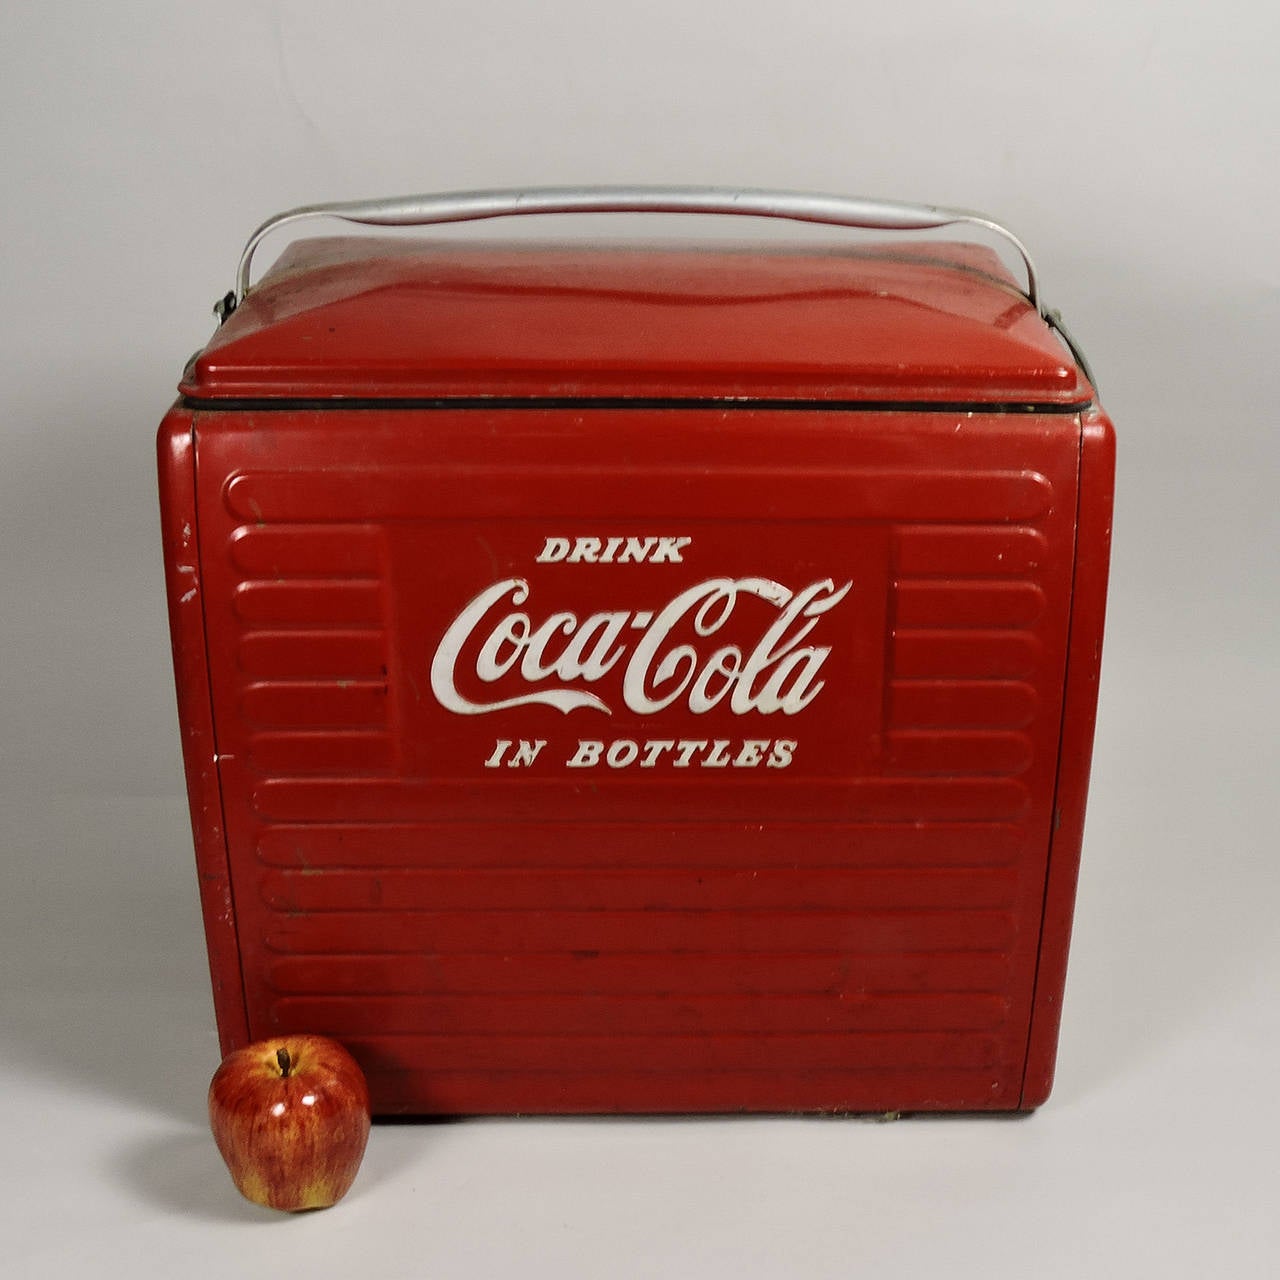 Mid-Century Modern Vintage Drink Coca Cola in Bottles Picnic Cooler by Acton Mfg Co.